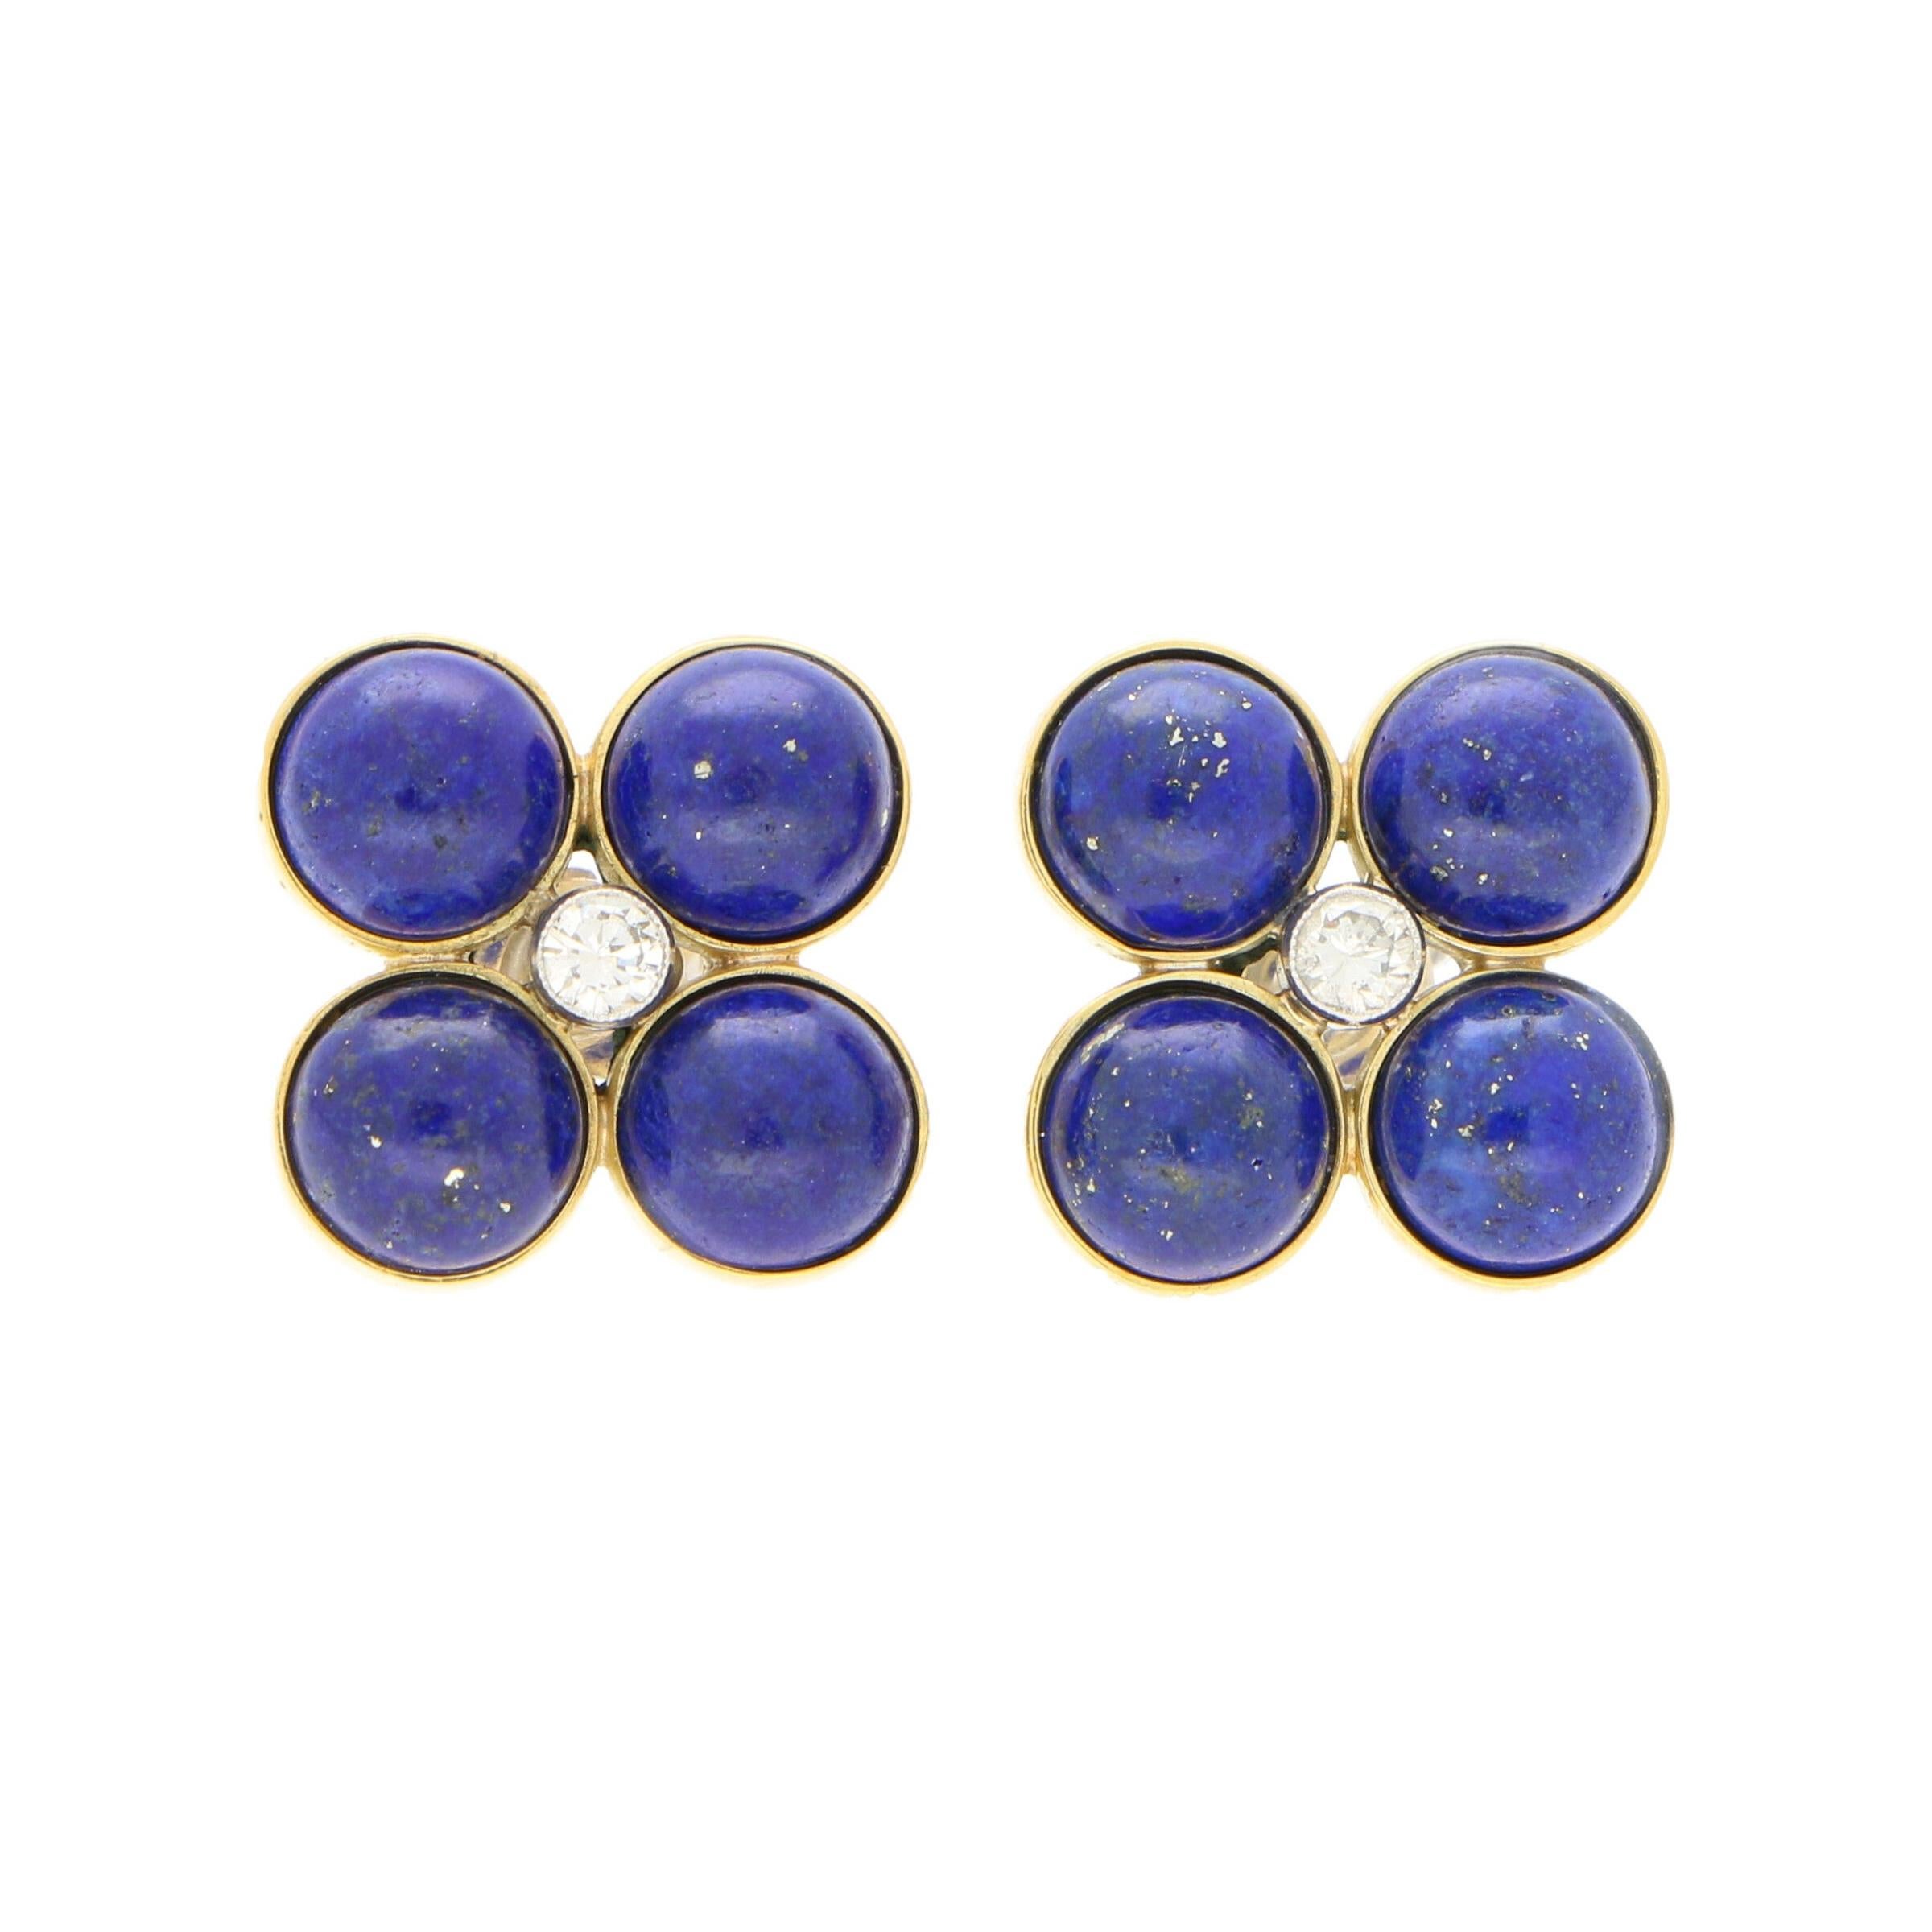 Blue Lapis Lazuli and Diamond Clover Stud Earrings Set in 18k Yellow Gold